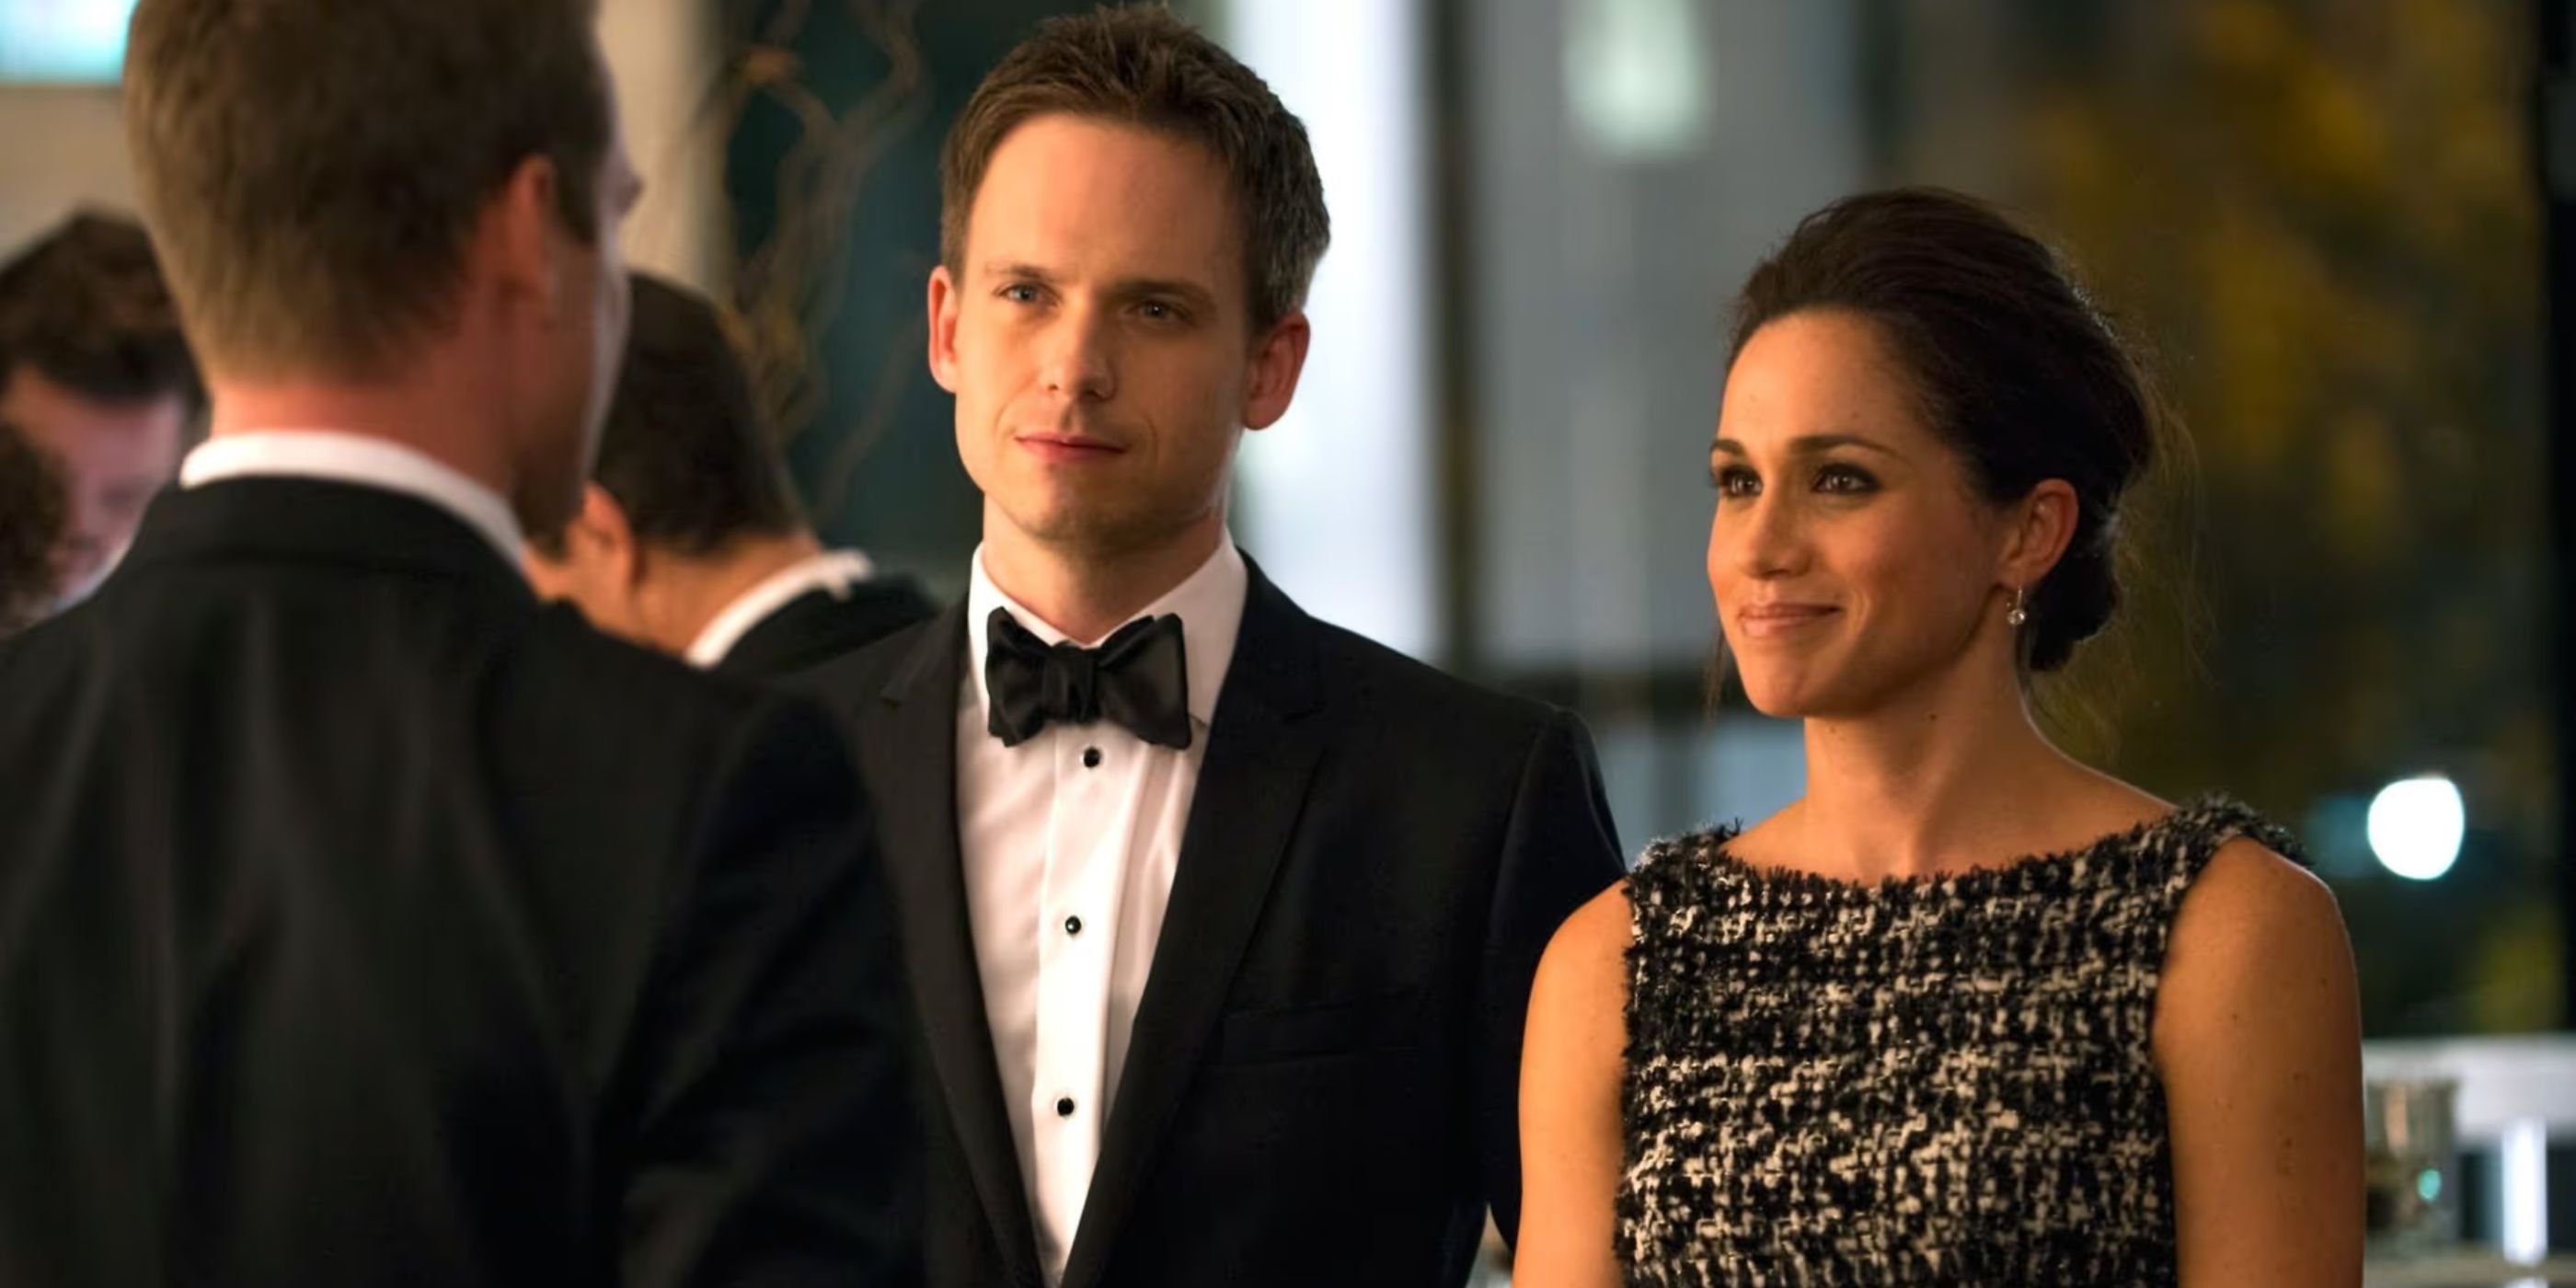 Mike Ross (Patrick J. Adams) and Rachel Zane (Meghan Markle) stand next to each other while talking to someone at a fancy dress event in 'Suits'.